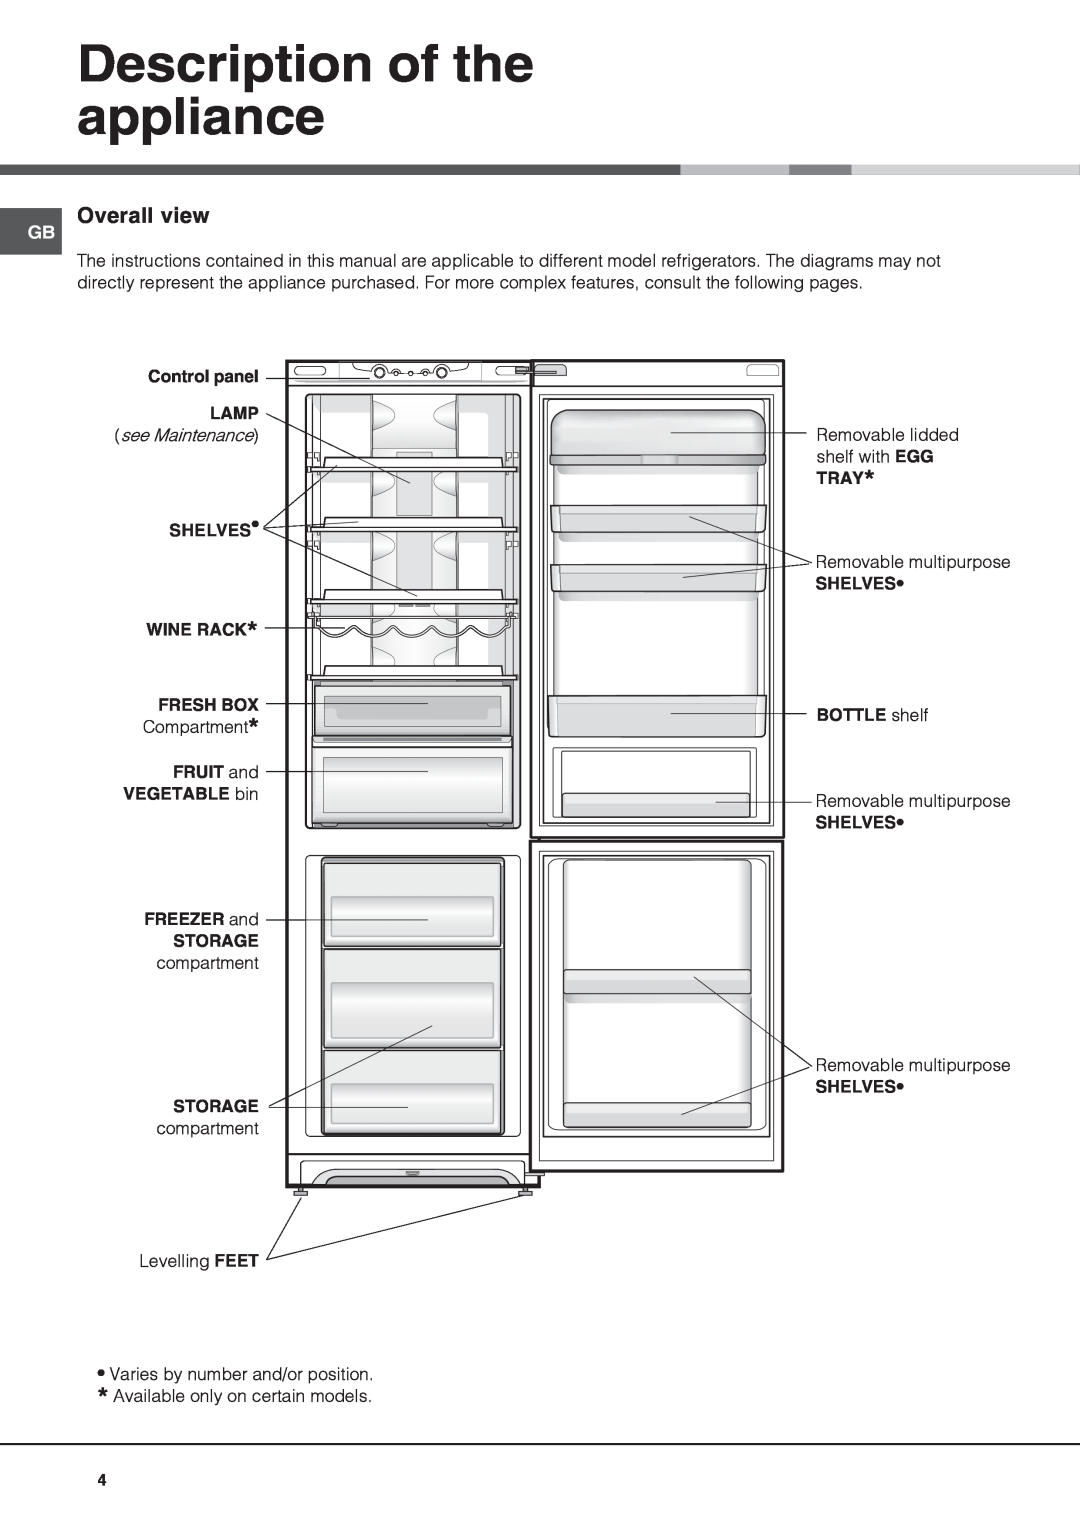 Hotpoint FFB6200AX manual Overall view, Description of the appliance, Shelves 